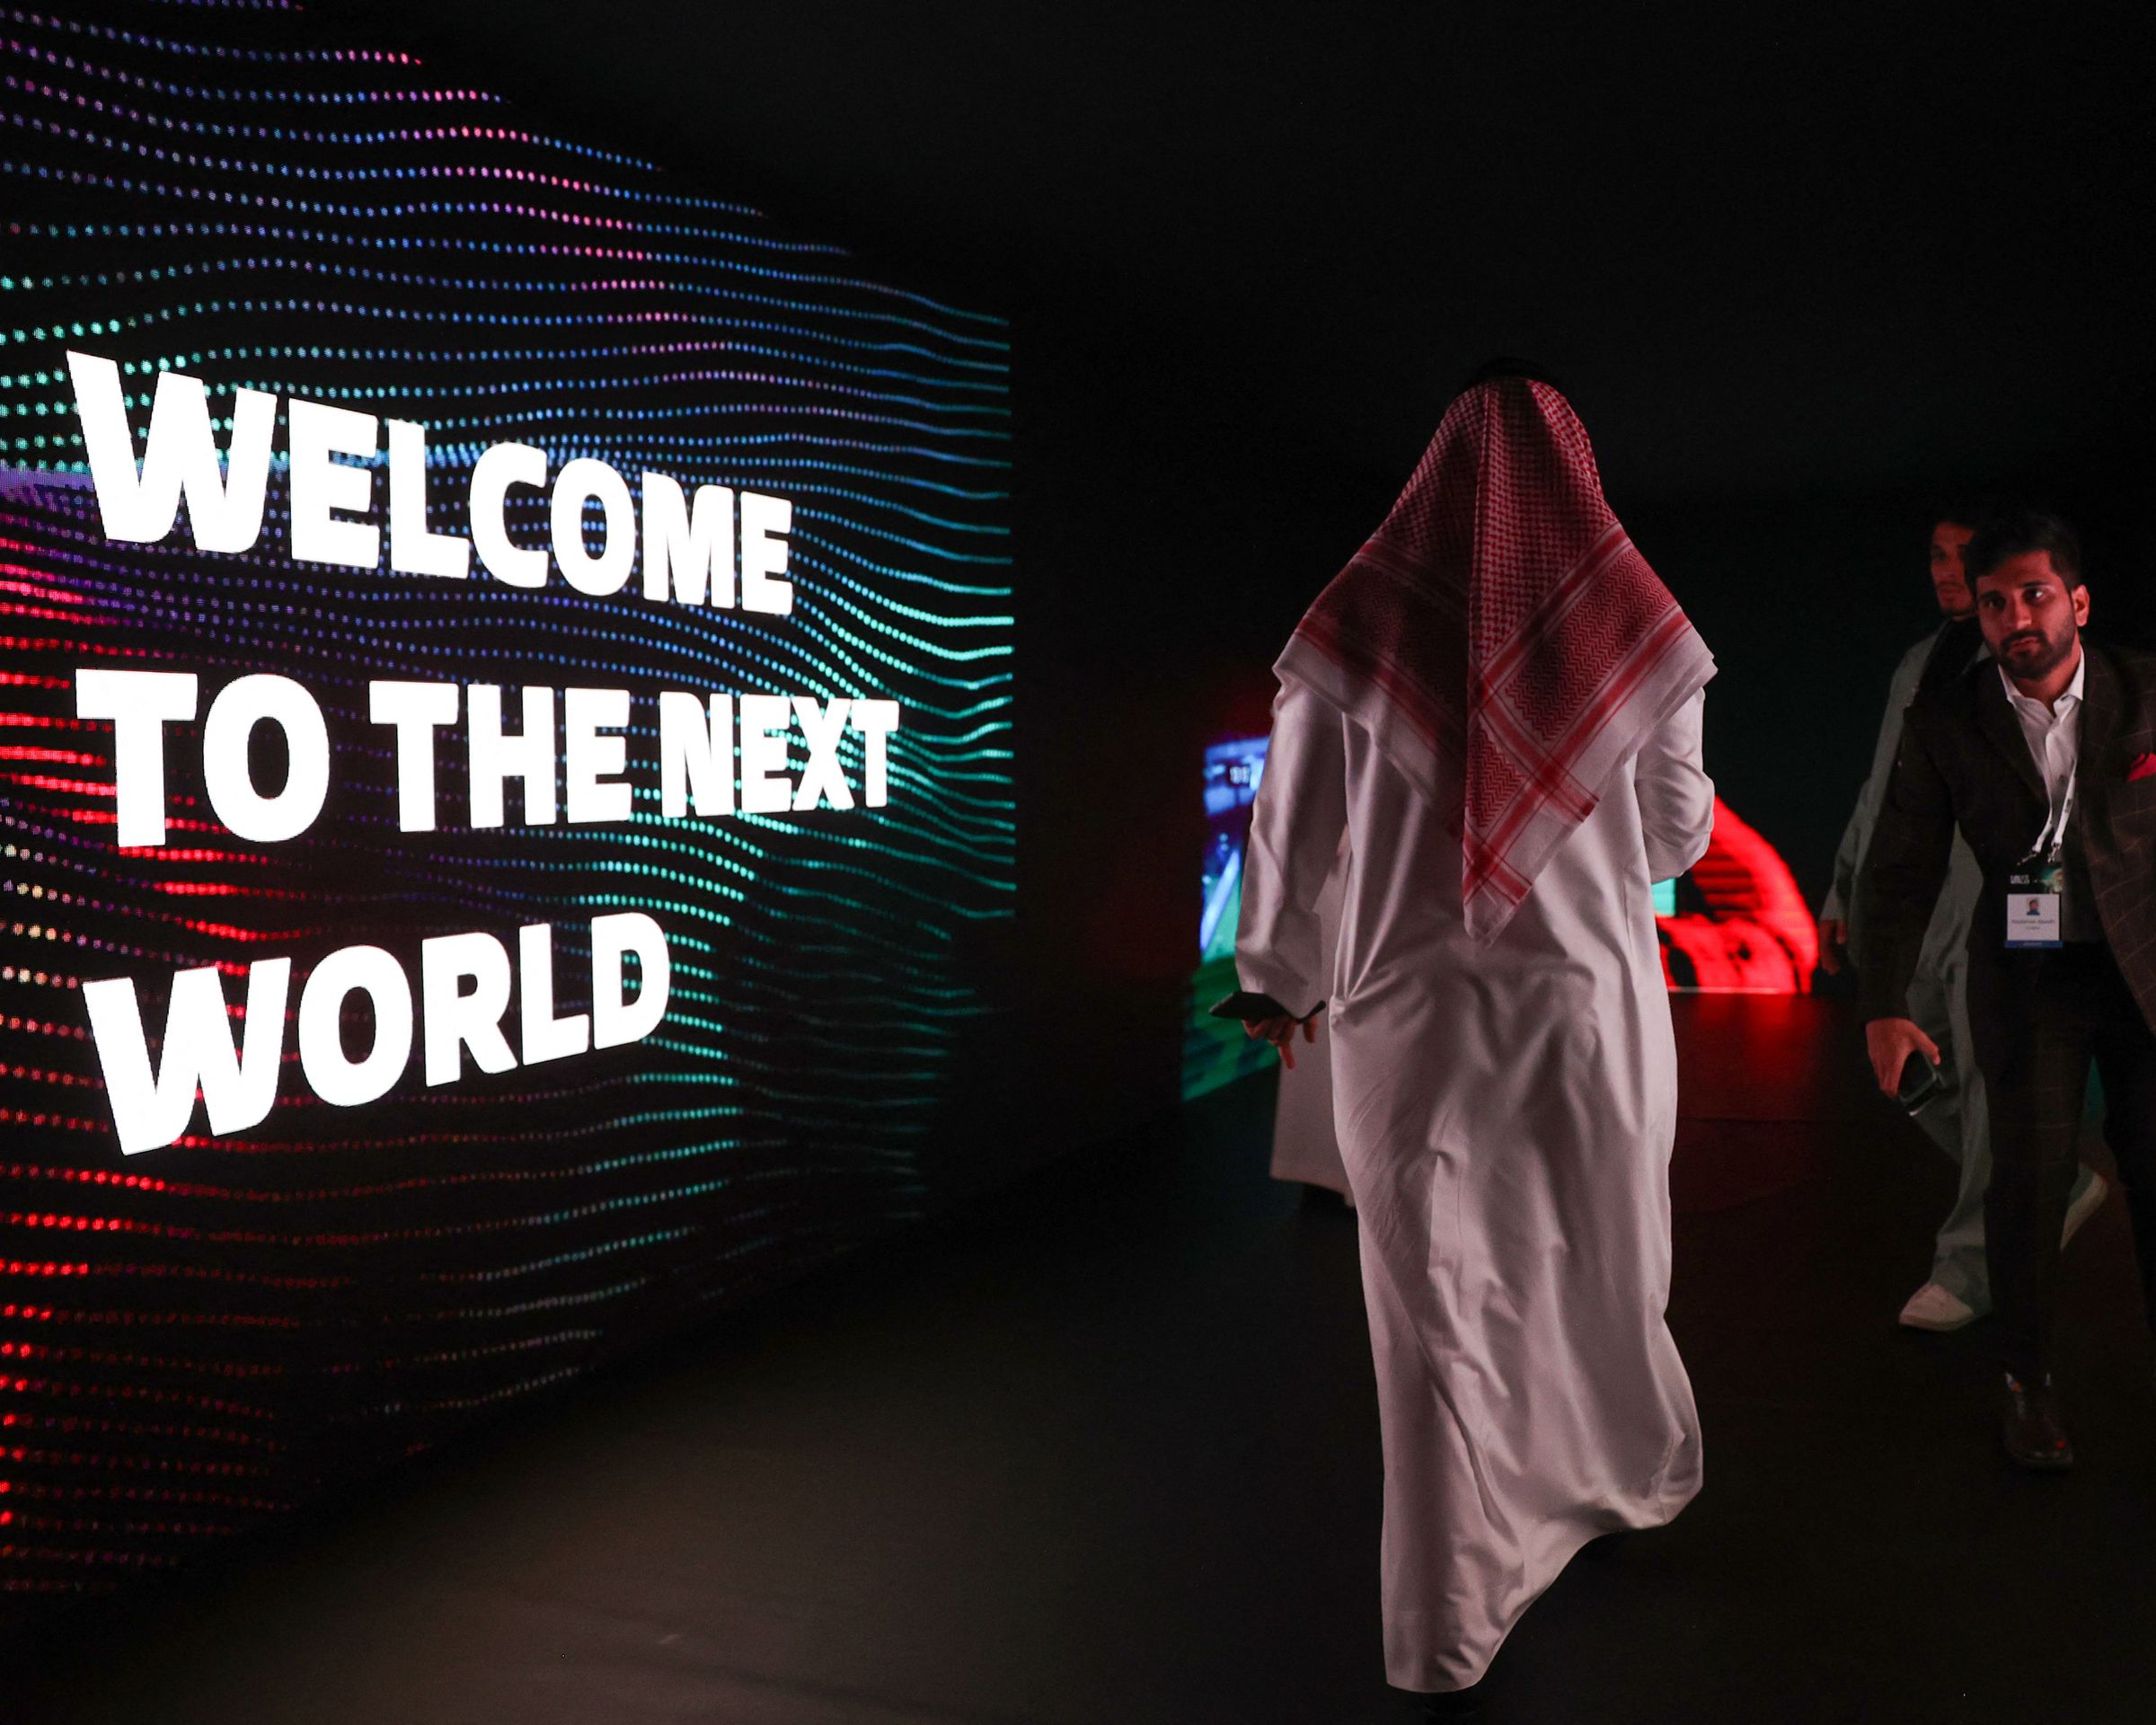 People attend the International E-Sport Gamers forum “Next World”, in the Saudi capital Riyadh, on September 7, 2022. - Much like with Formula One and professional golf, Saudi Arabia, the world’蝉 biggest oil exporter has in recent years leveraged its immense wealth to assert itself on the eSports stage, hosting glitzy conferences and snapping up established tournament organisers.&nbsp;